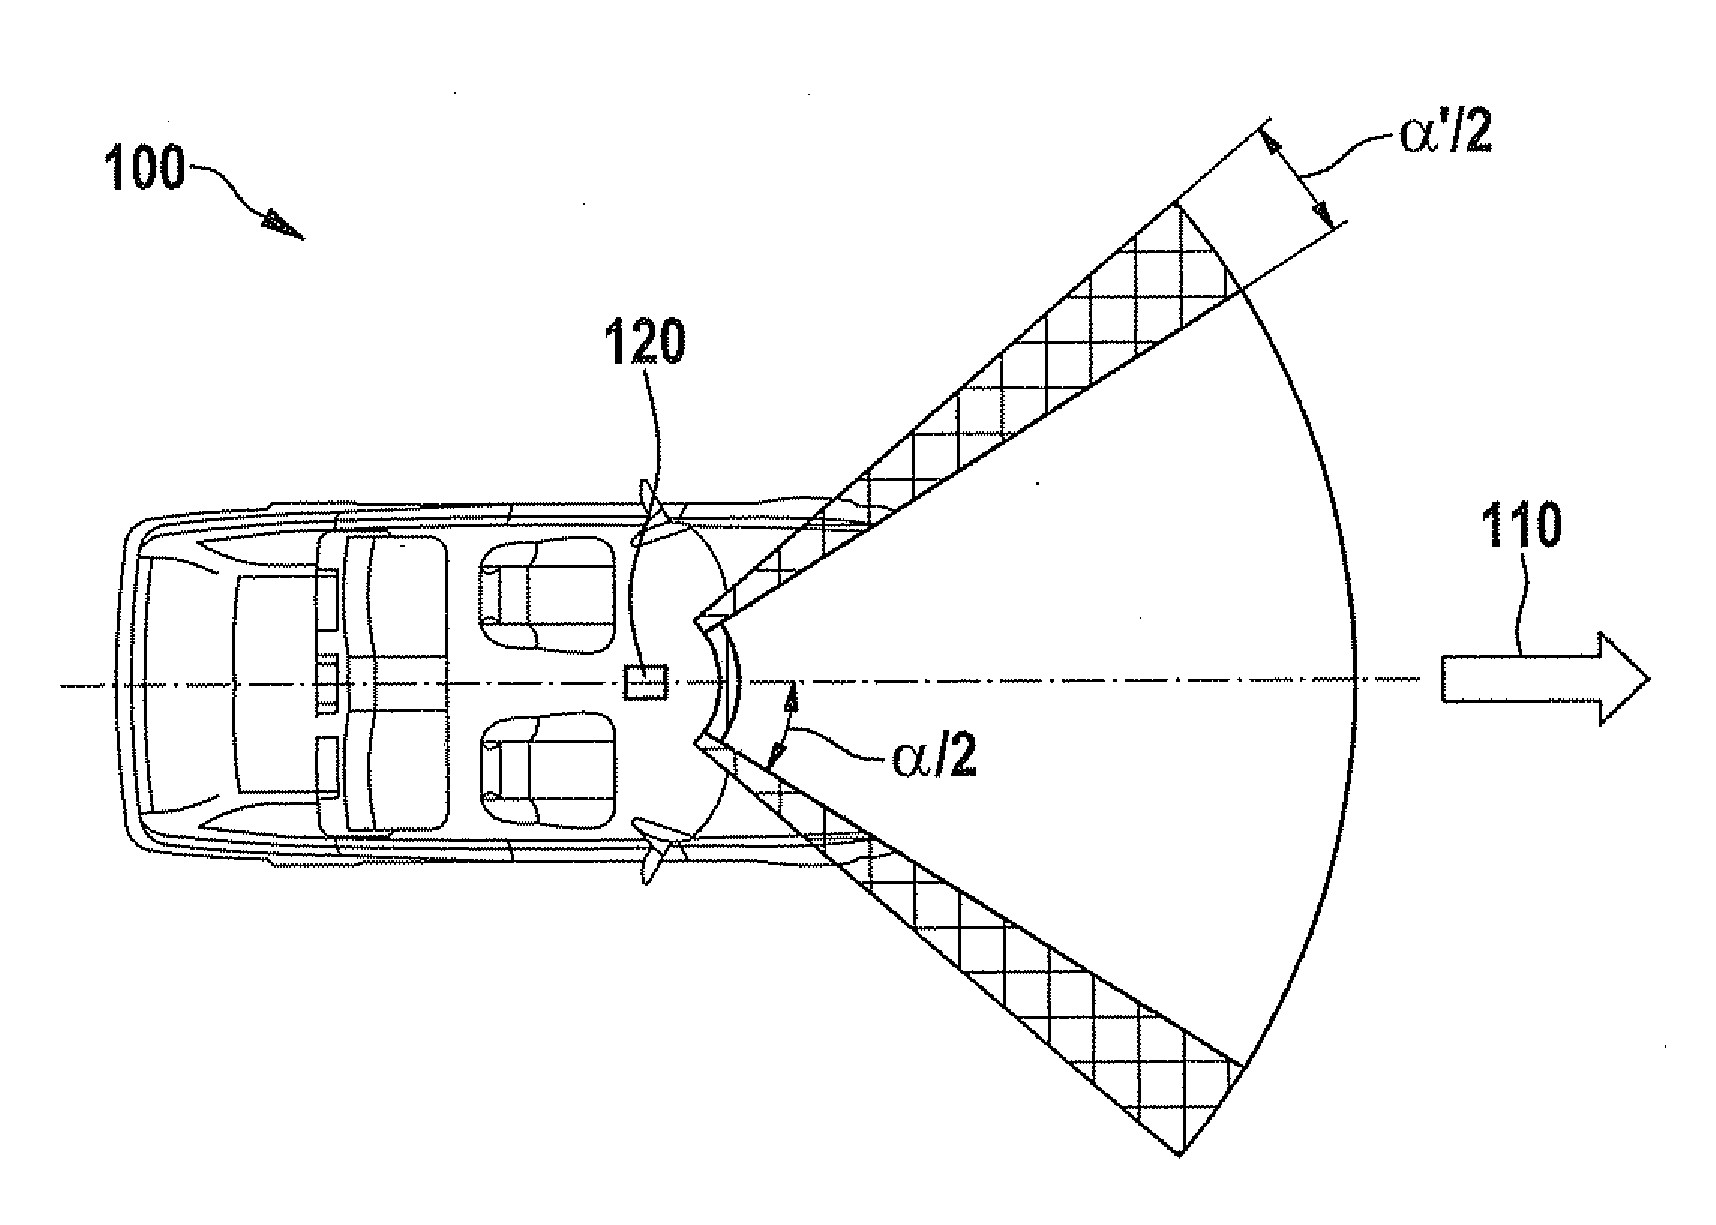 Device and method for directing radiation in the direction of an optical element of an image sensing device of a vehicle